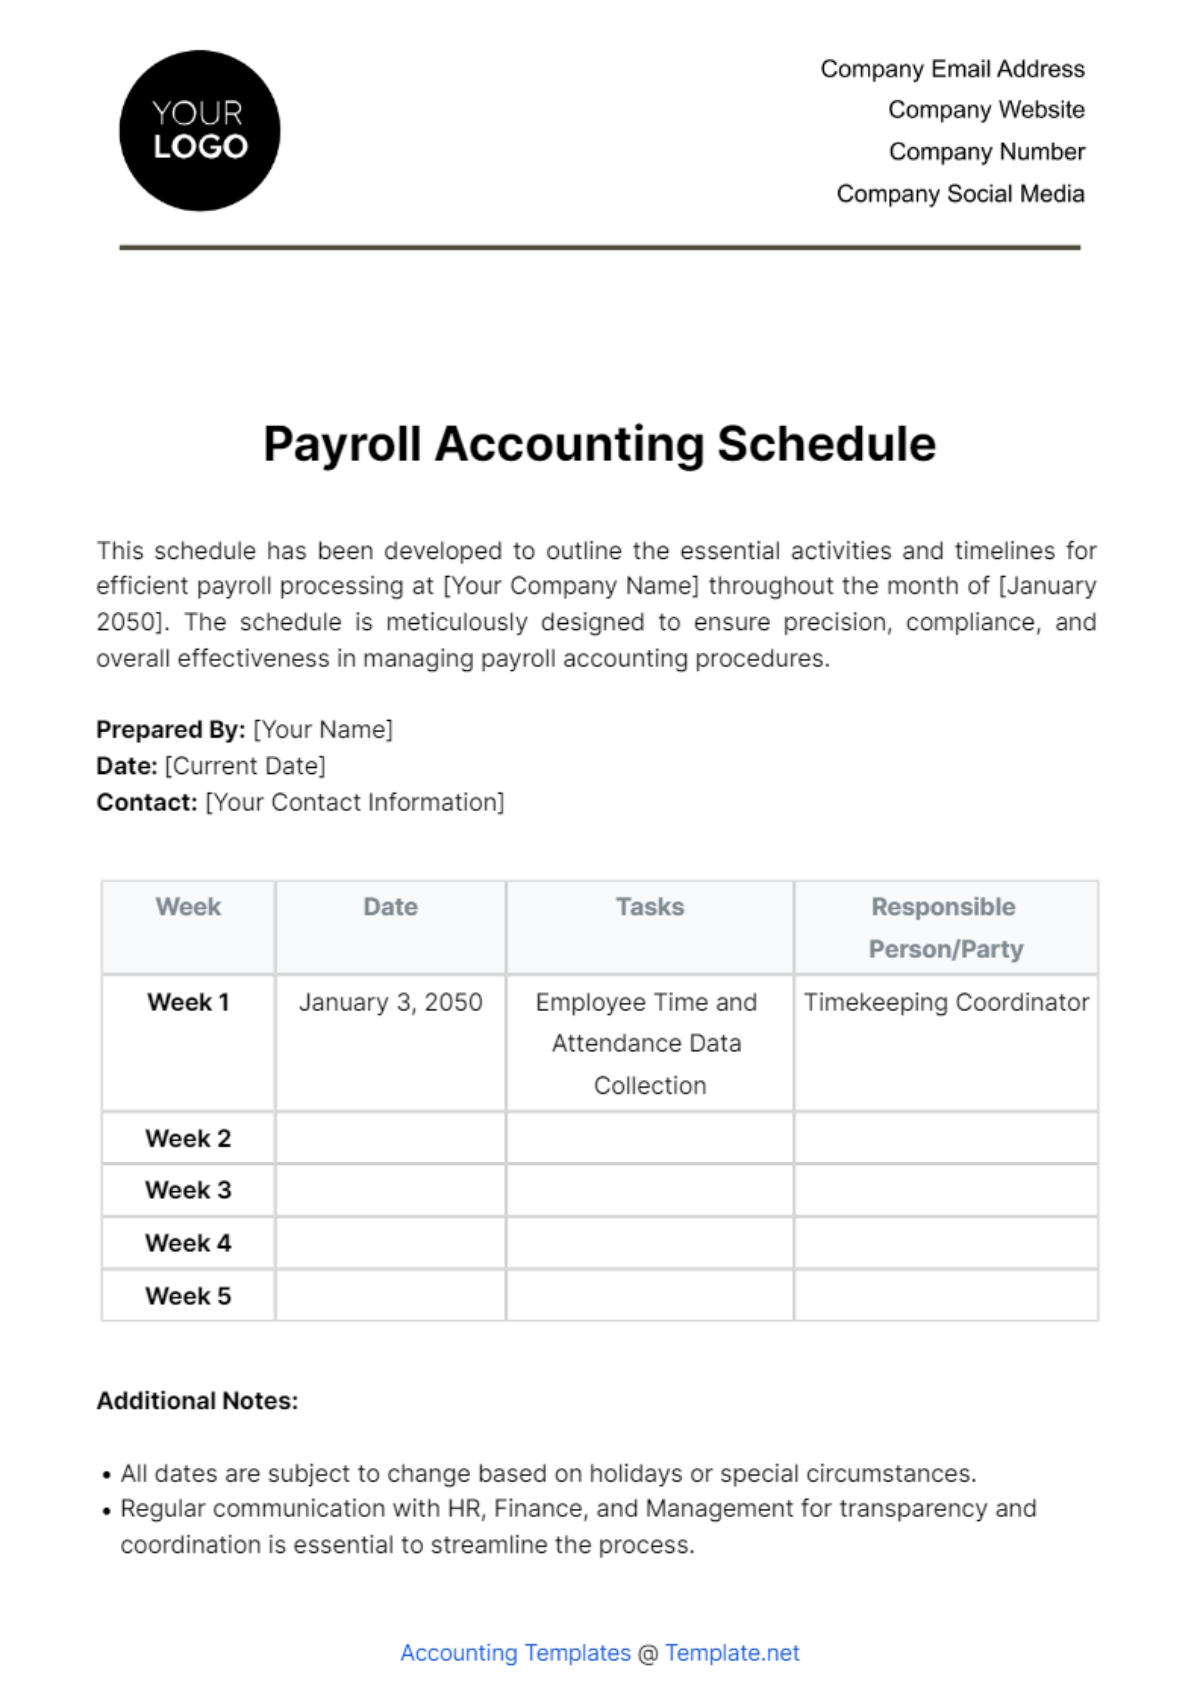 Free Payroll Accounting Schedule Template